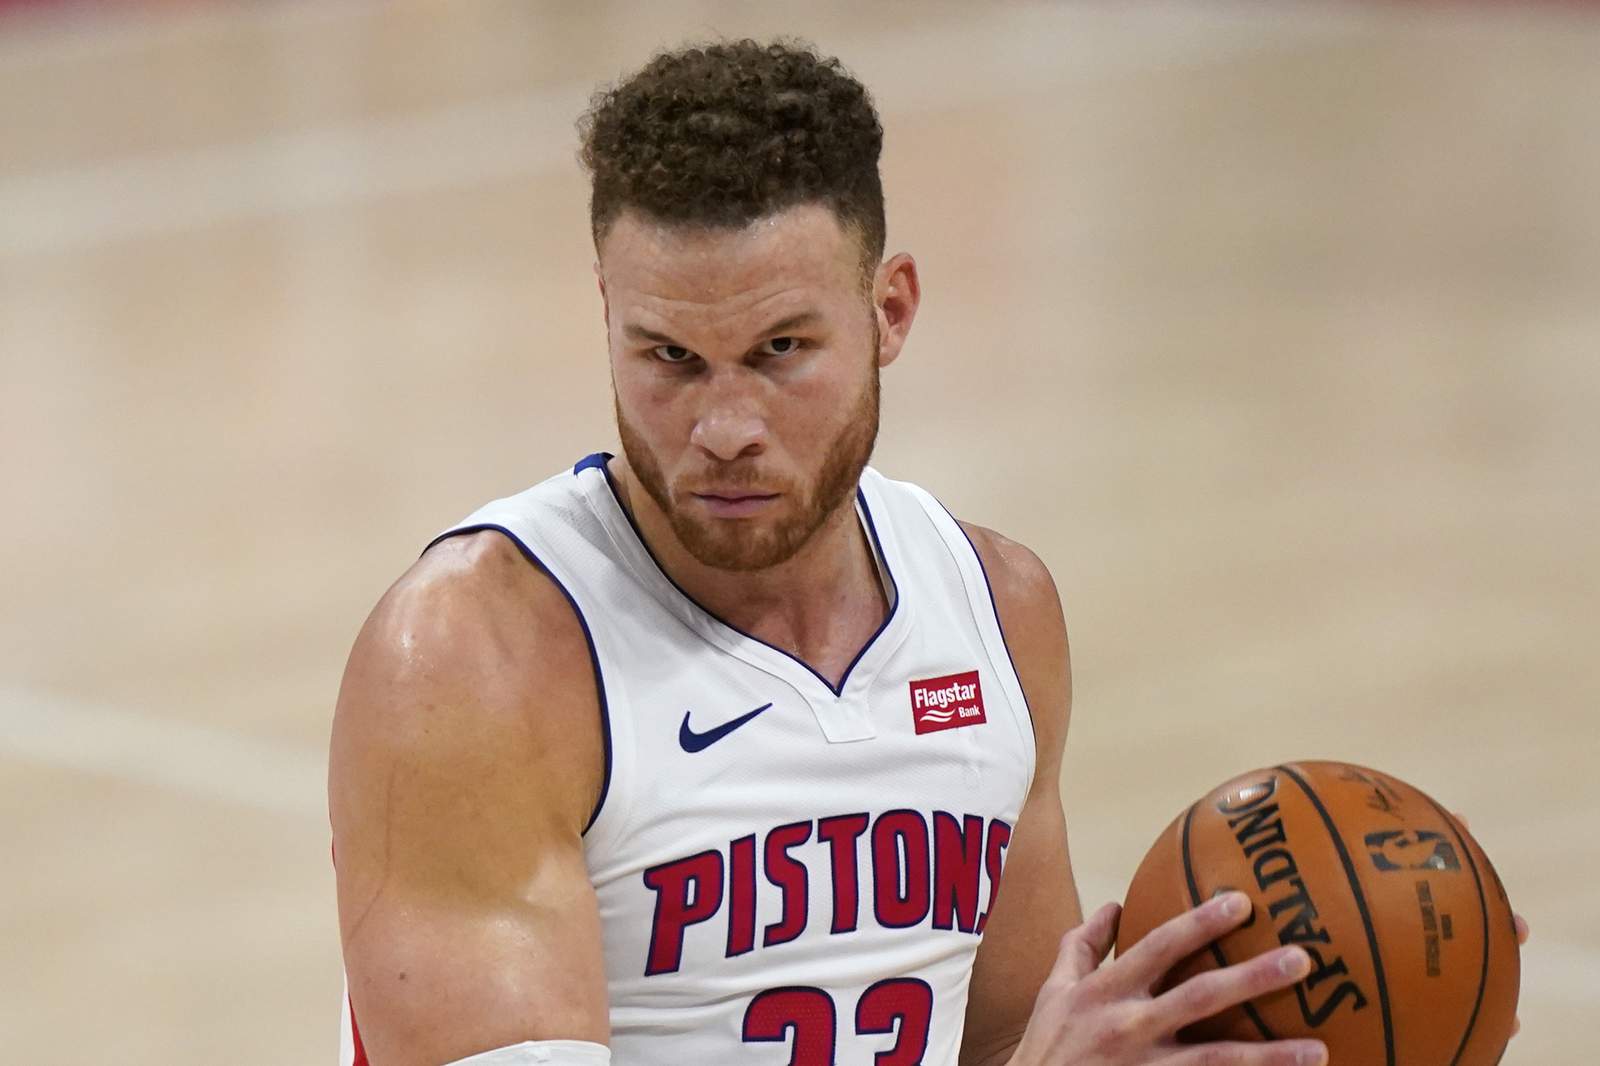 AP source: Blake Griffin agrees to deal with Nets